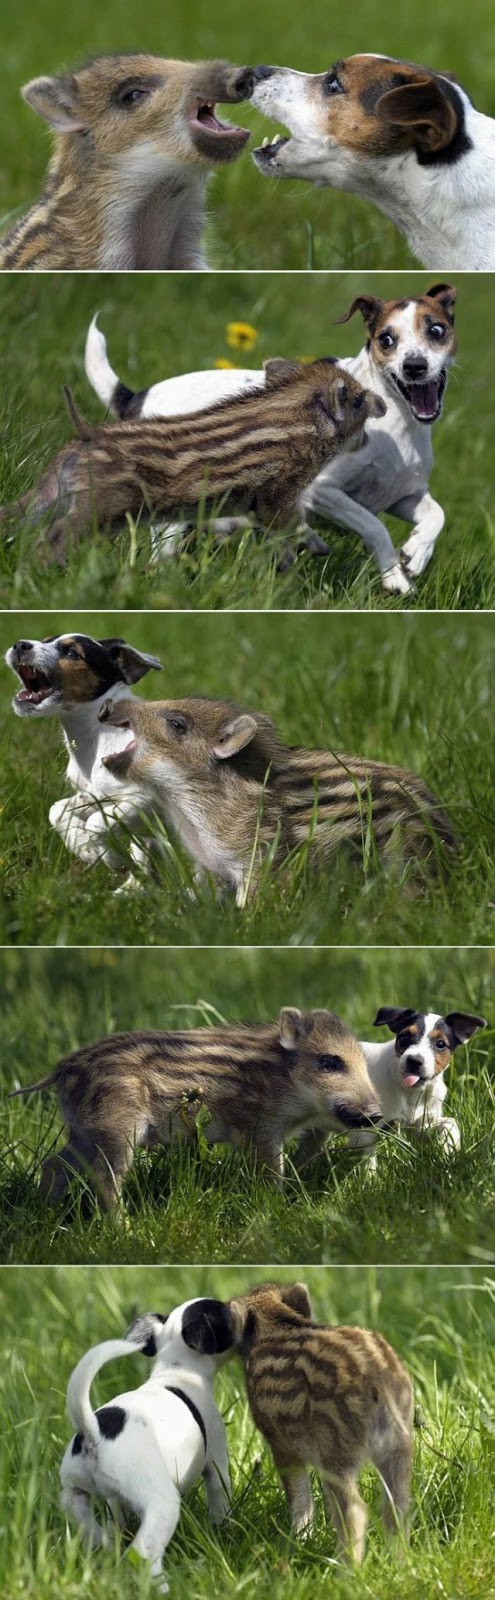 9 Unlikely Animal Friendships 005